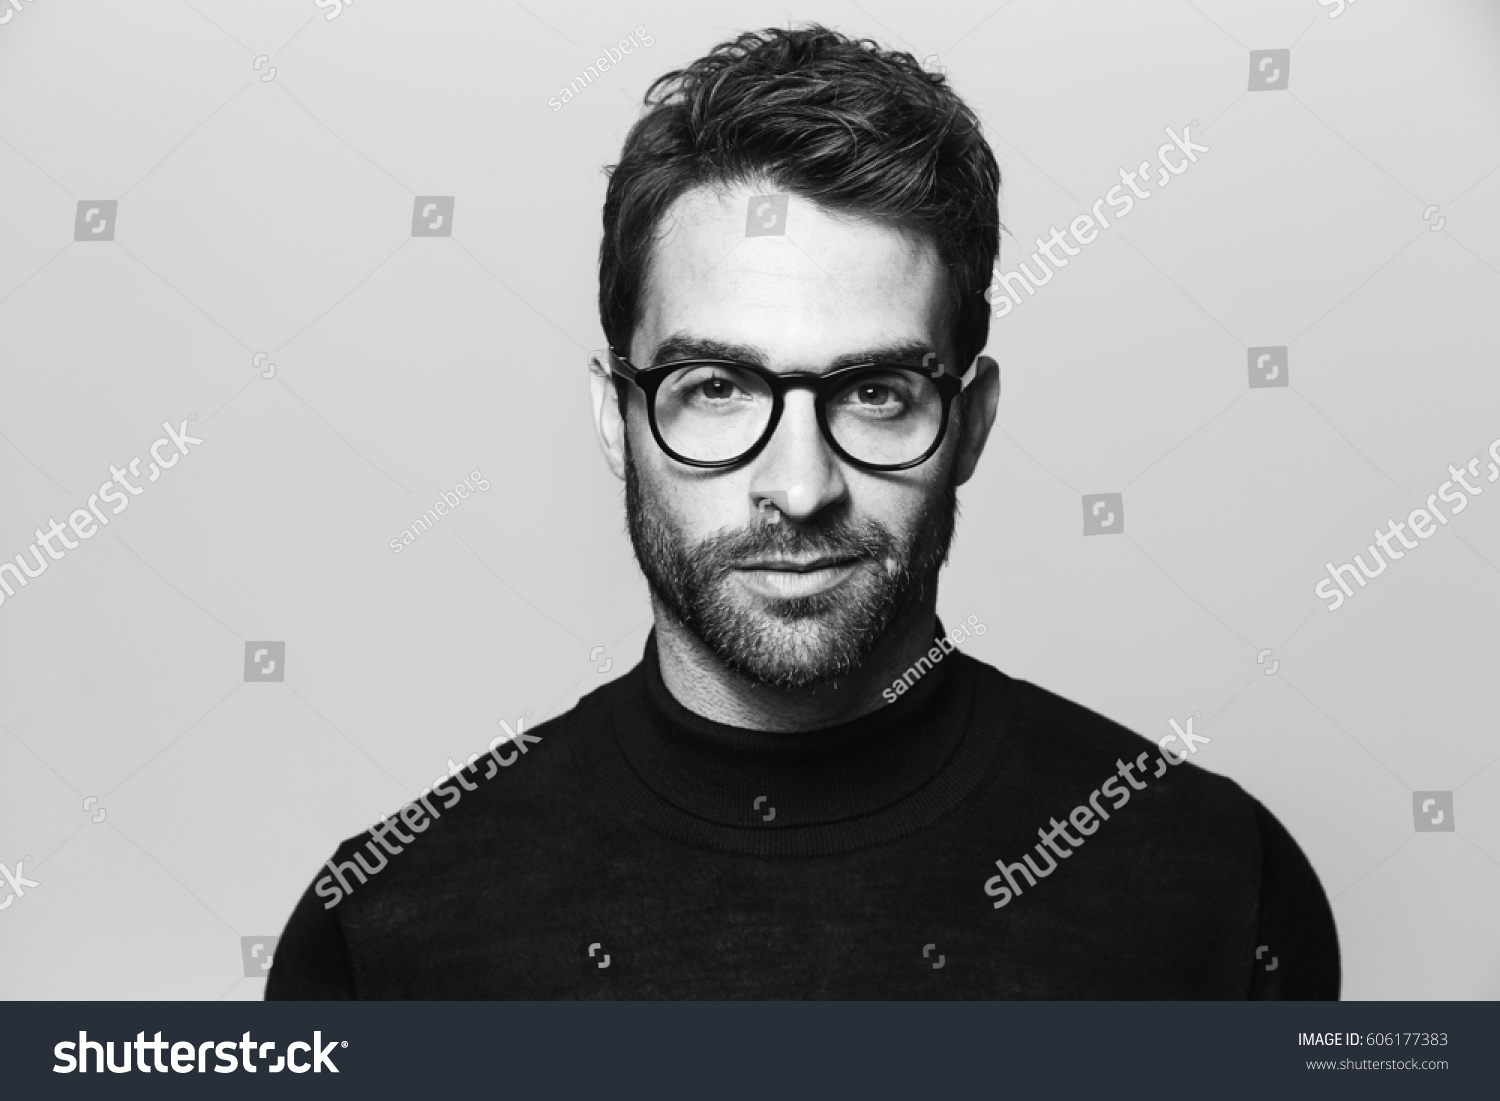 Handsome man in spectacles, portrait #606177383